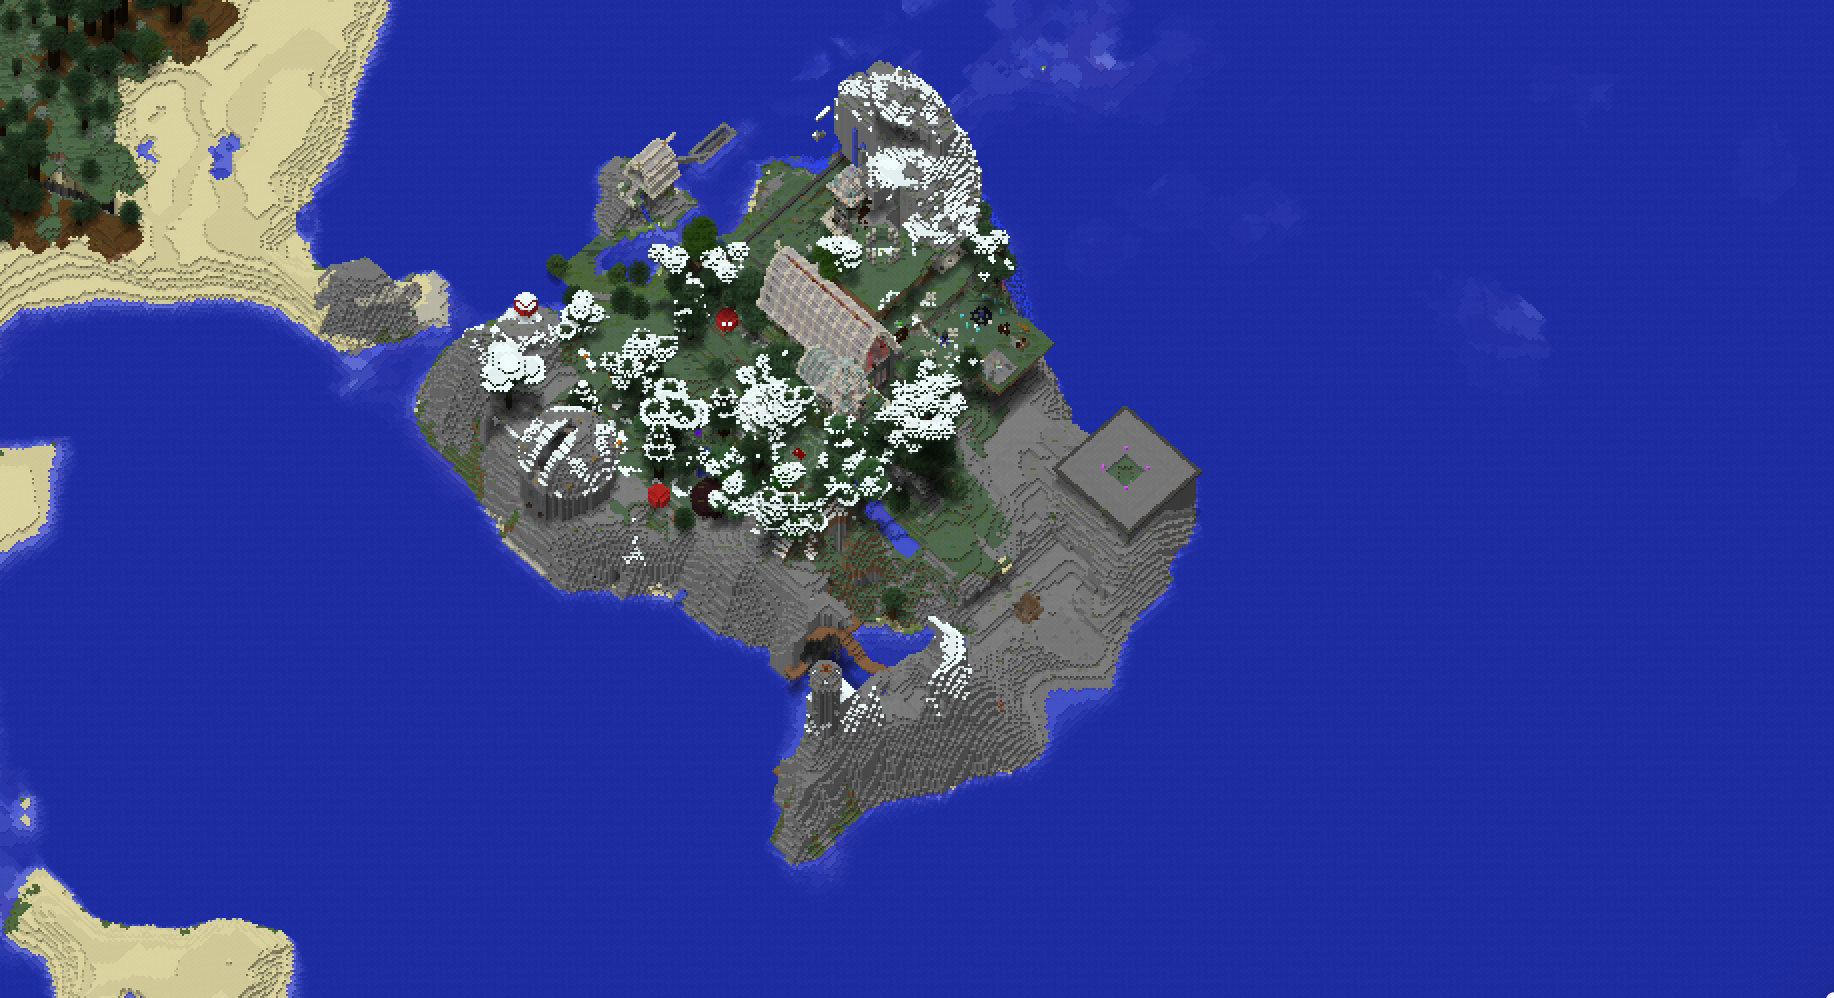 A screenshot of Thunder Mountain, from the Germinal Minecraft server map.